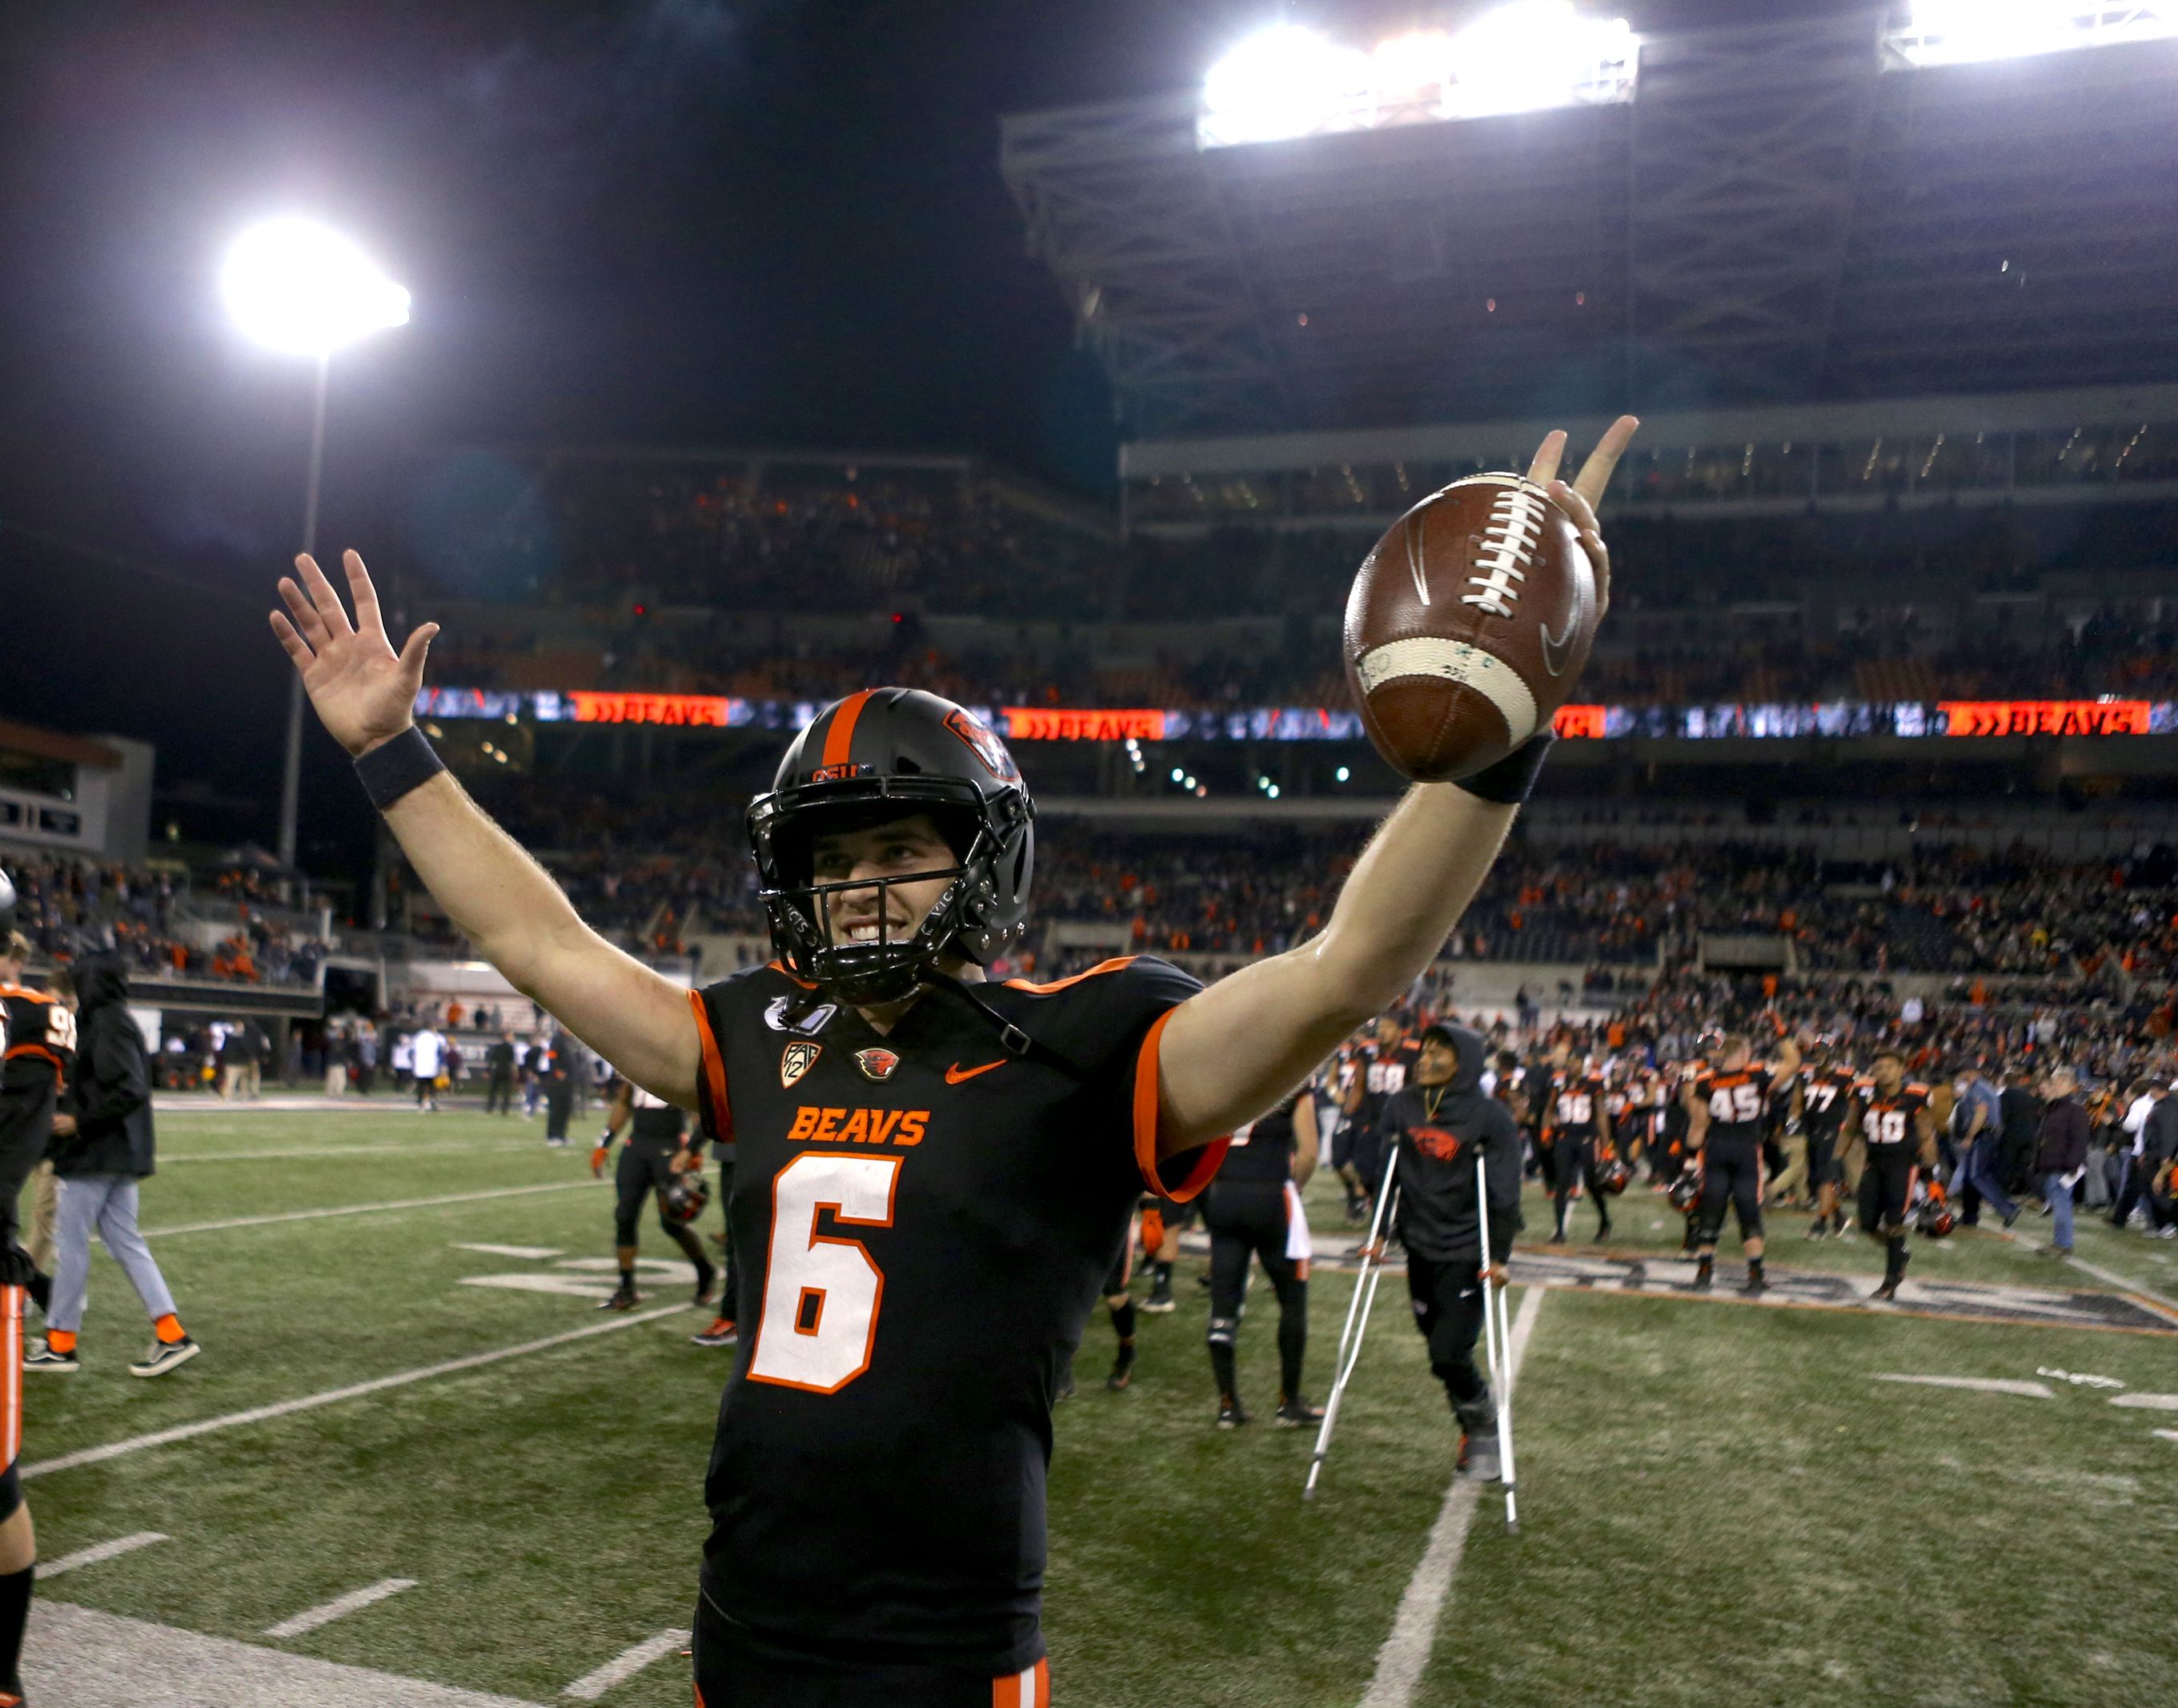 Oregon State in contention for division title after beating Arizona State -  OPB